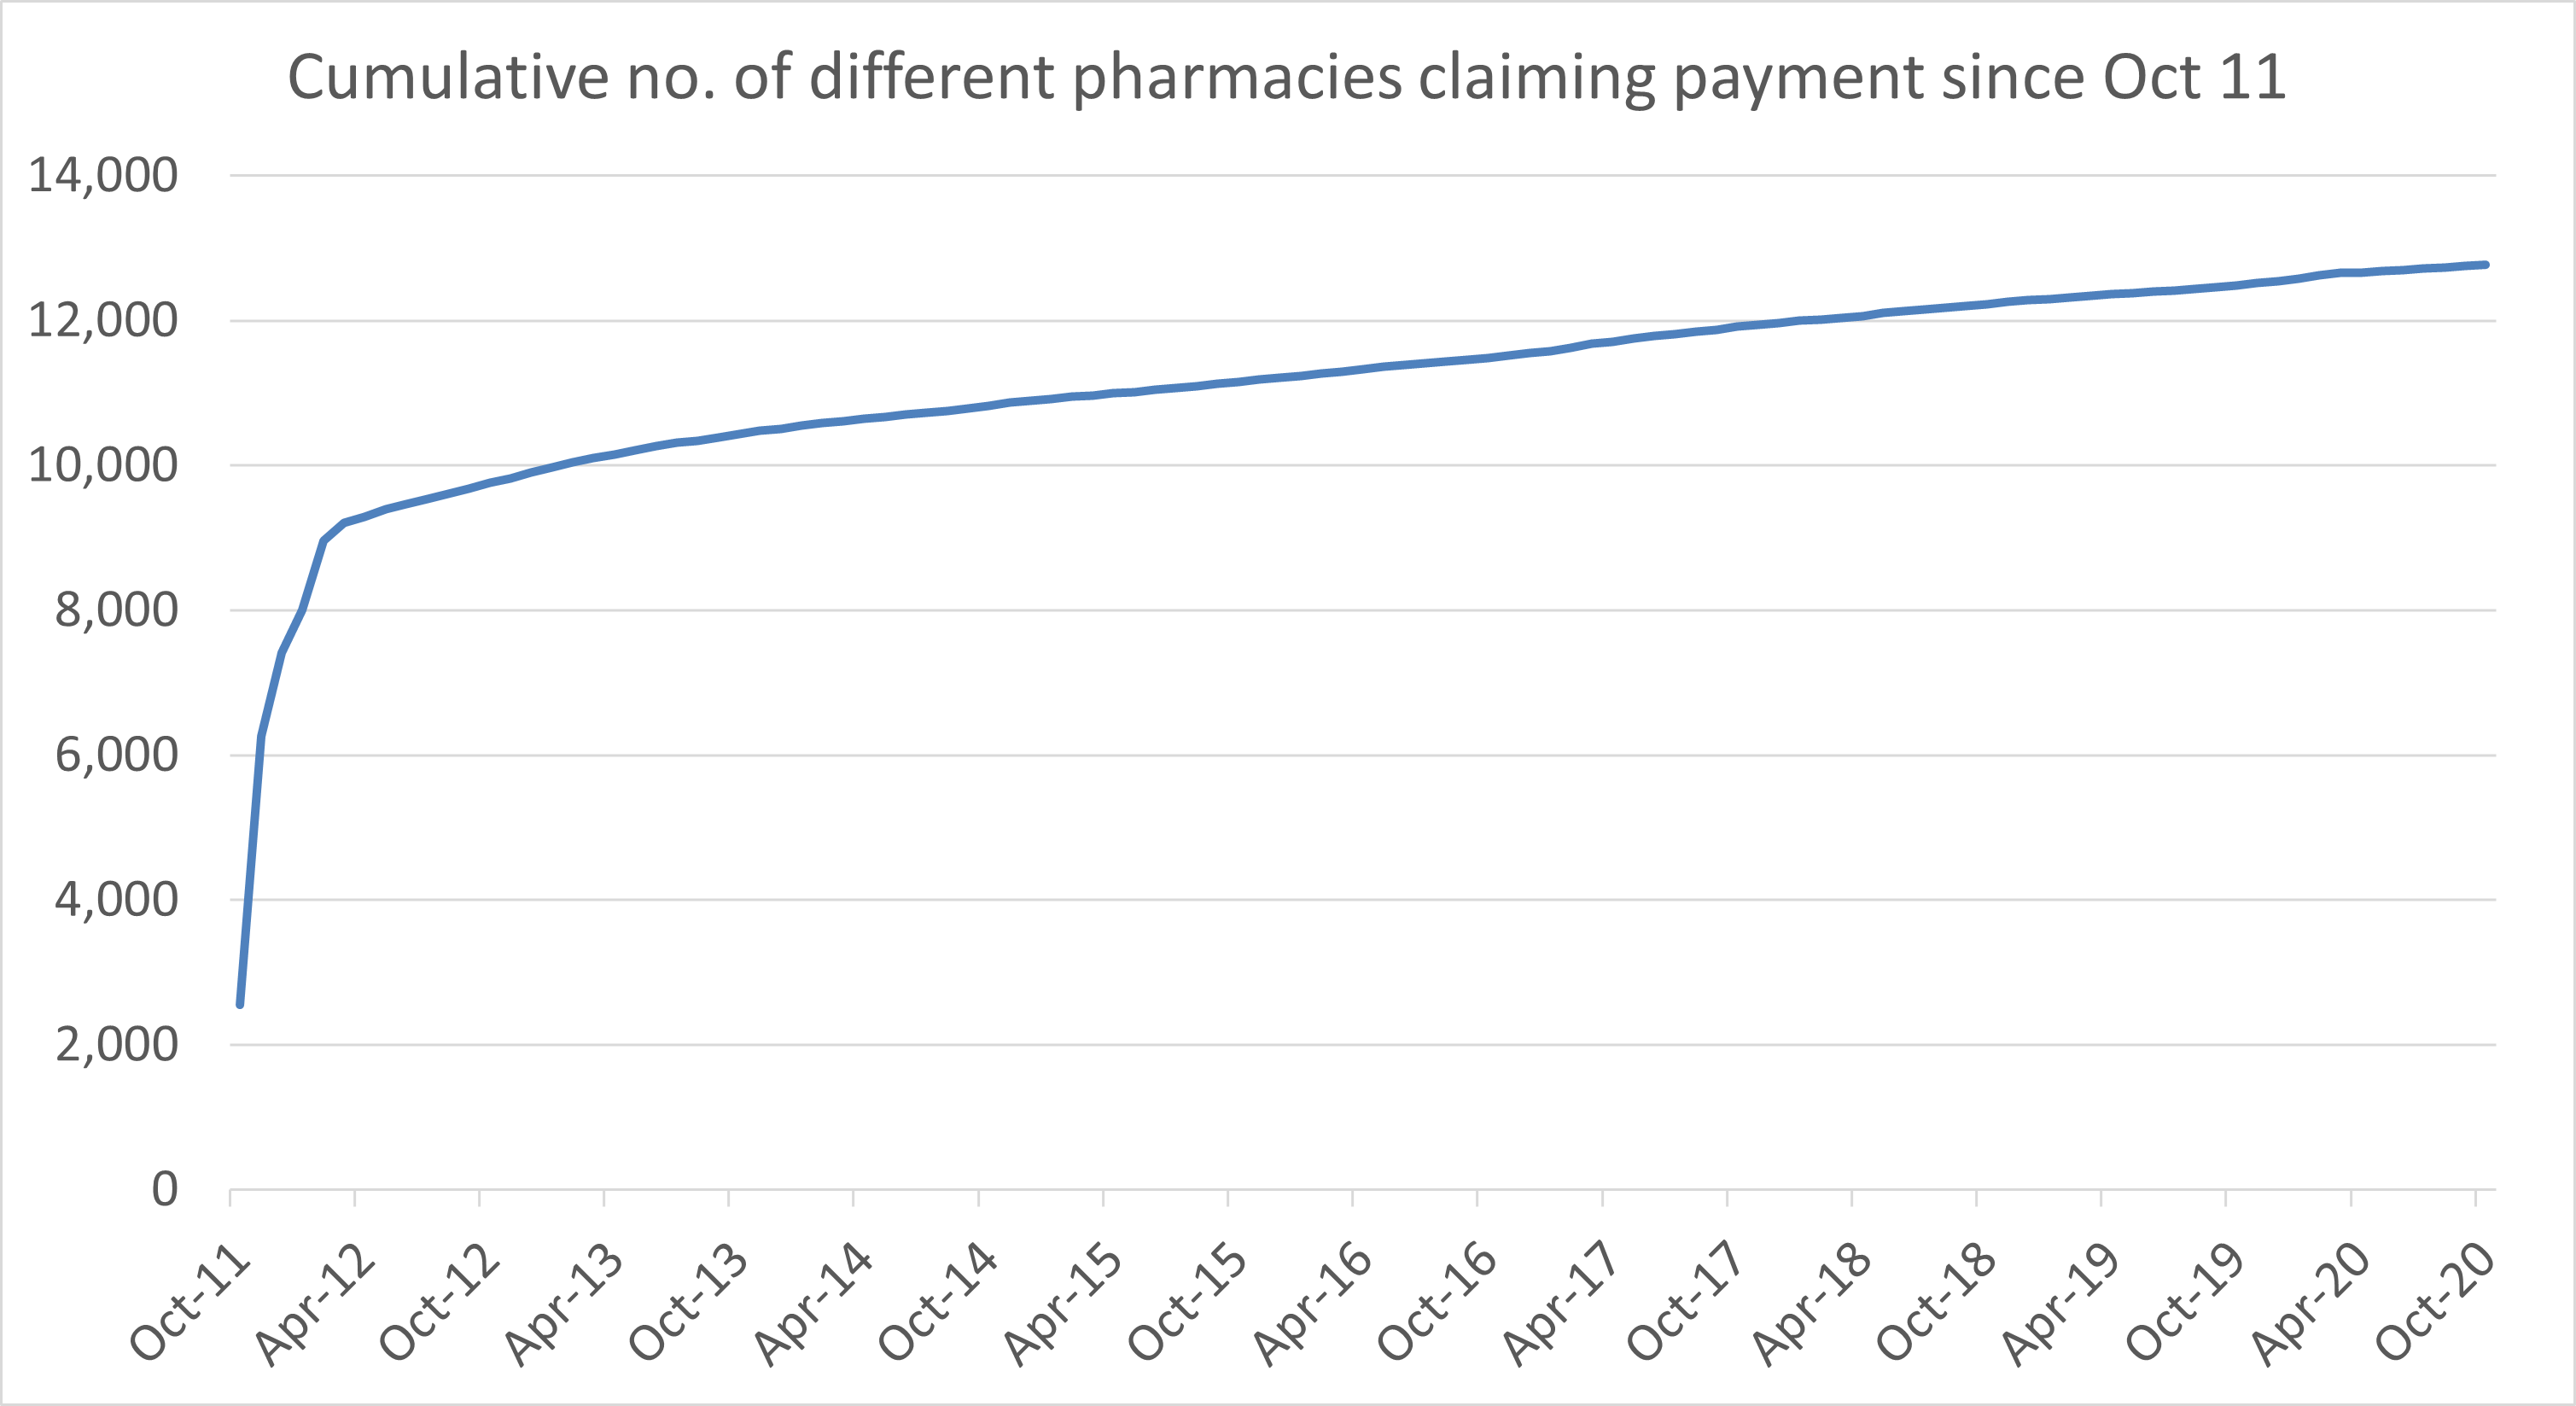 Cumulative no. of different pharmacies claiming payment since Oct 11